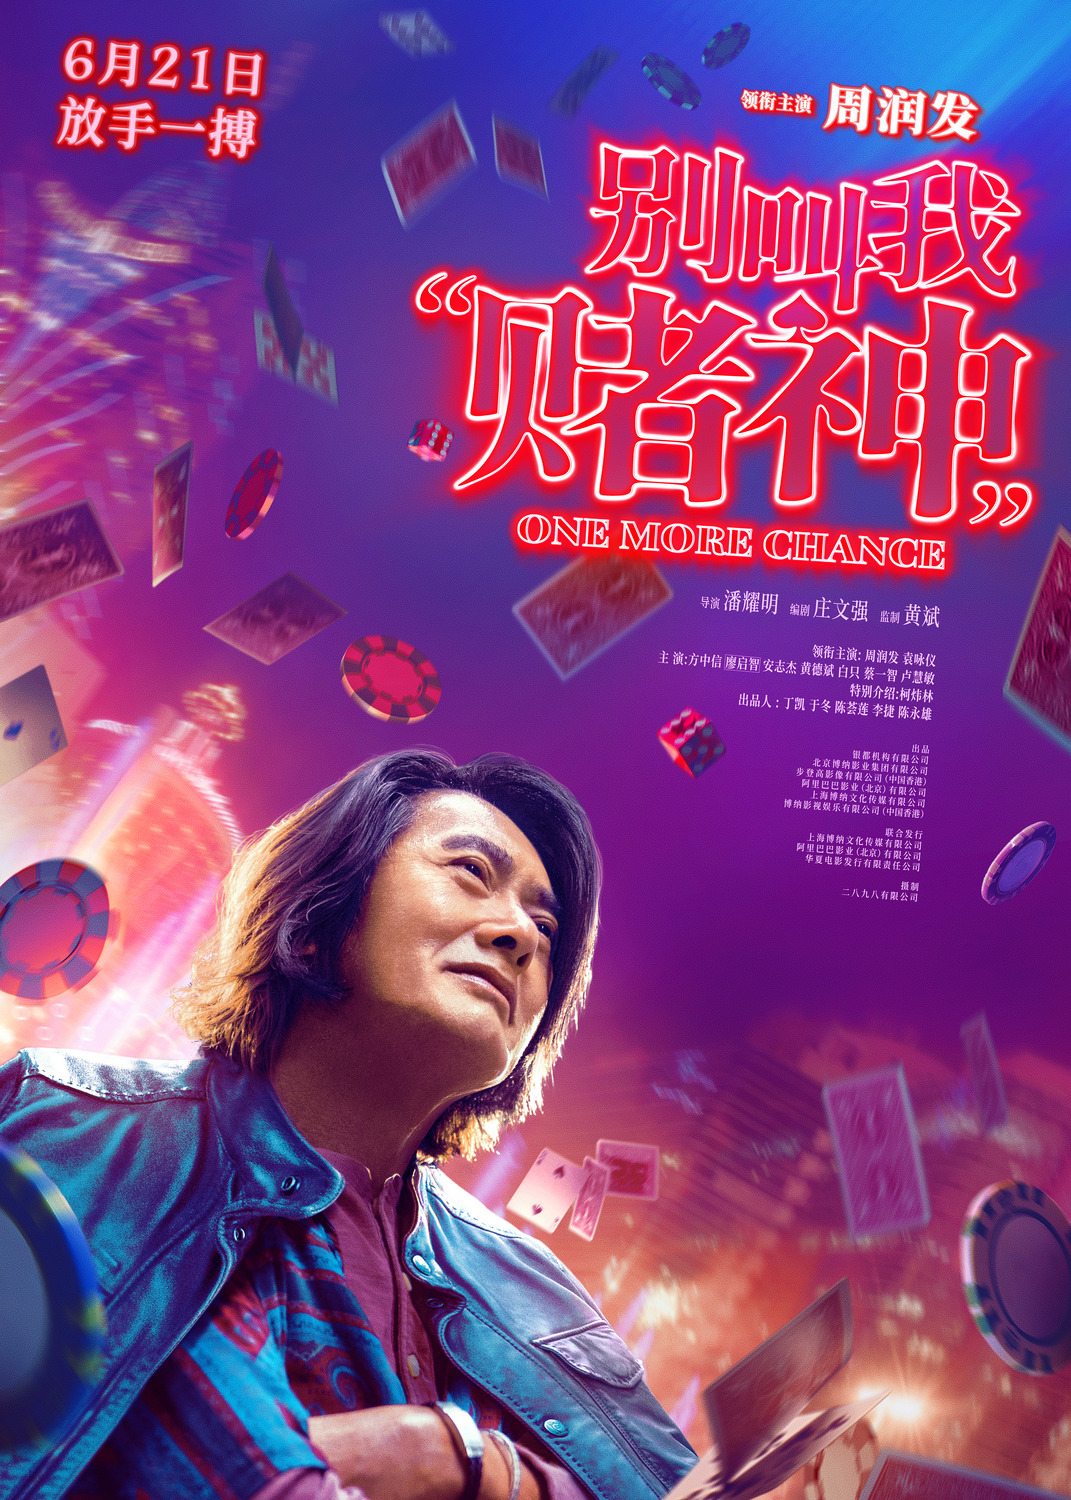 Extra Large Movie Poster Image for Don't Call Me God of Gamblers 